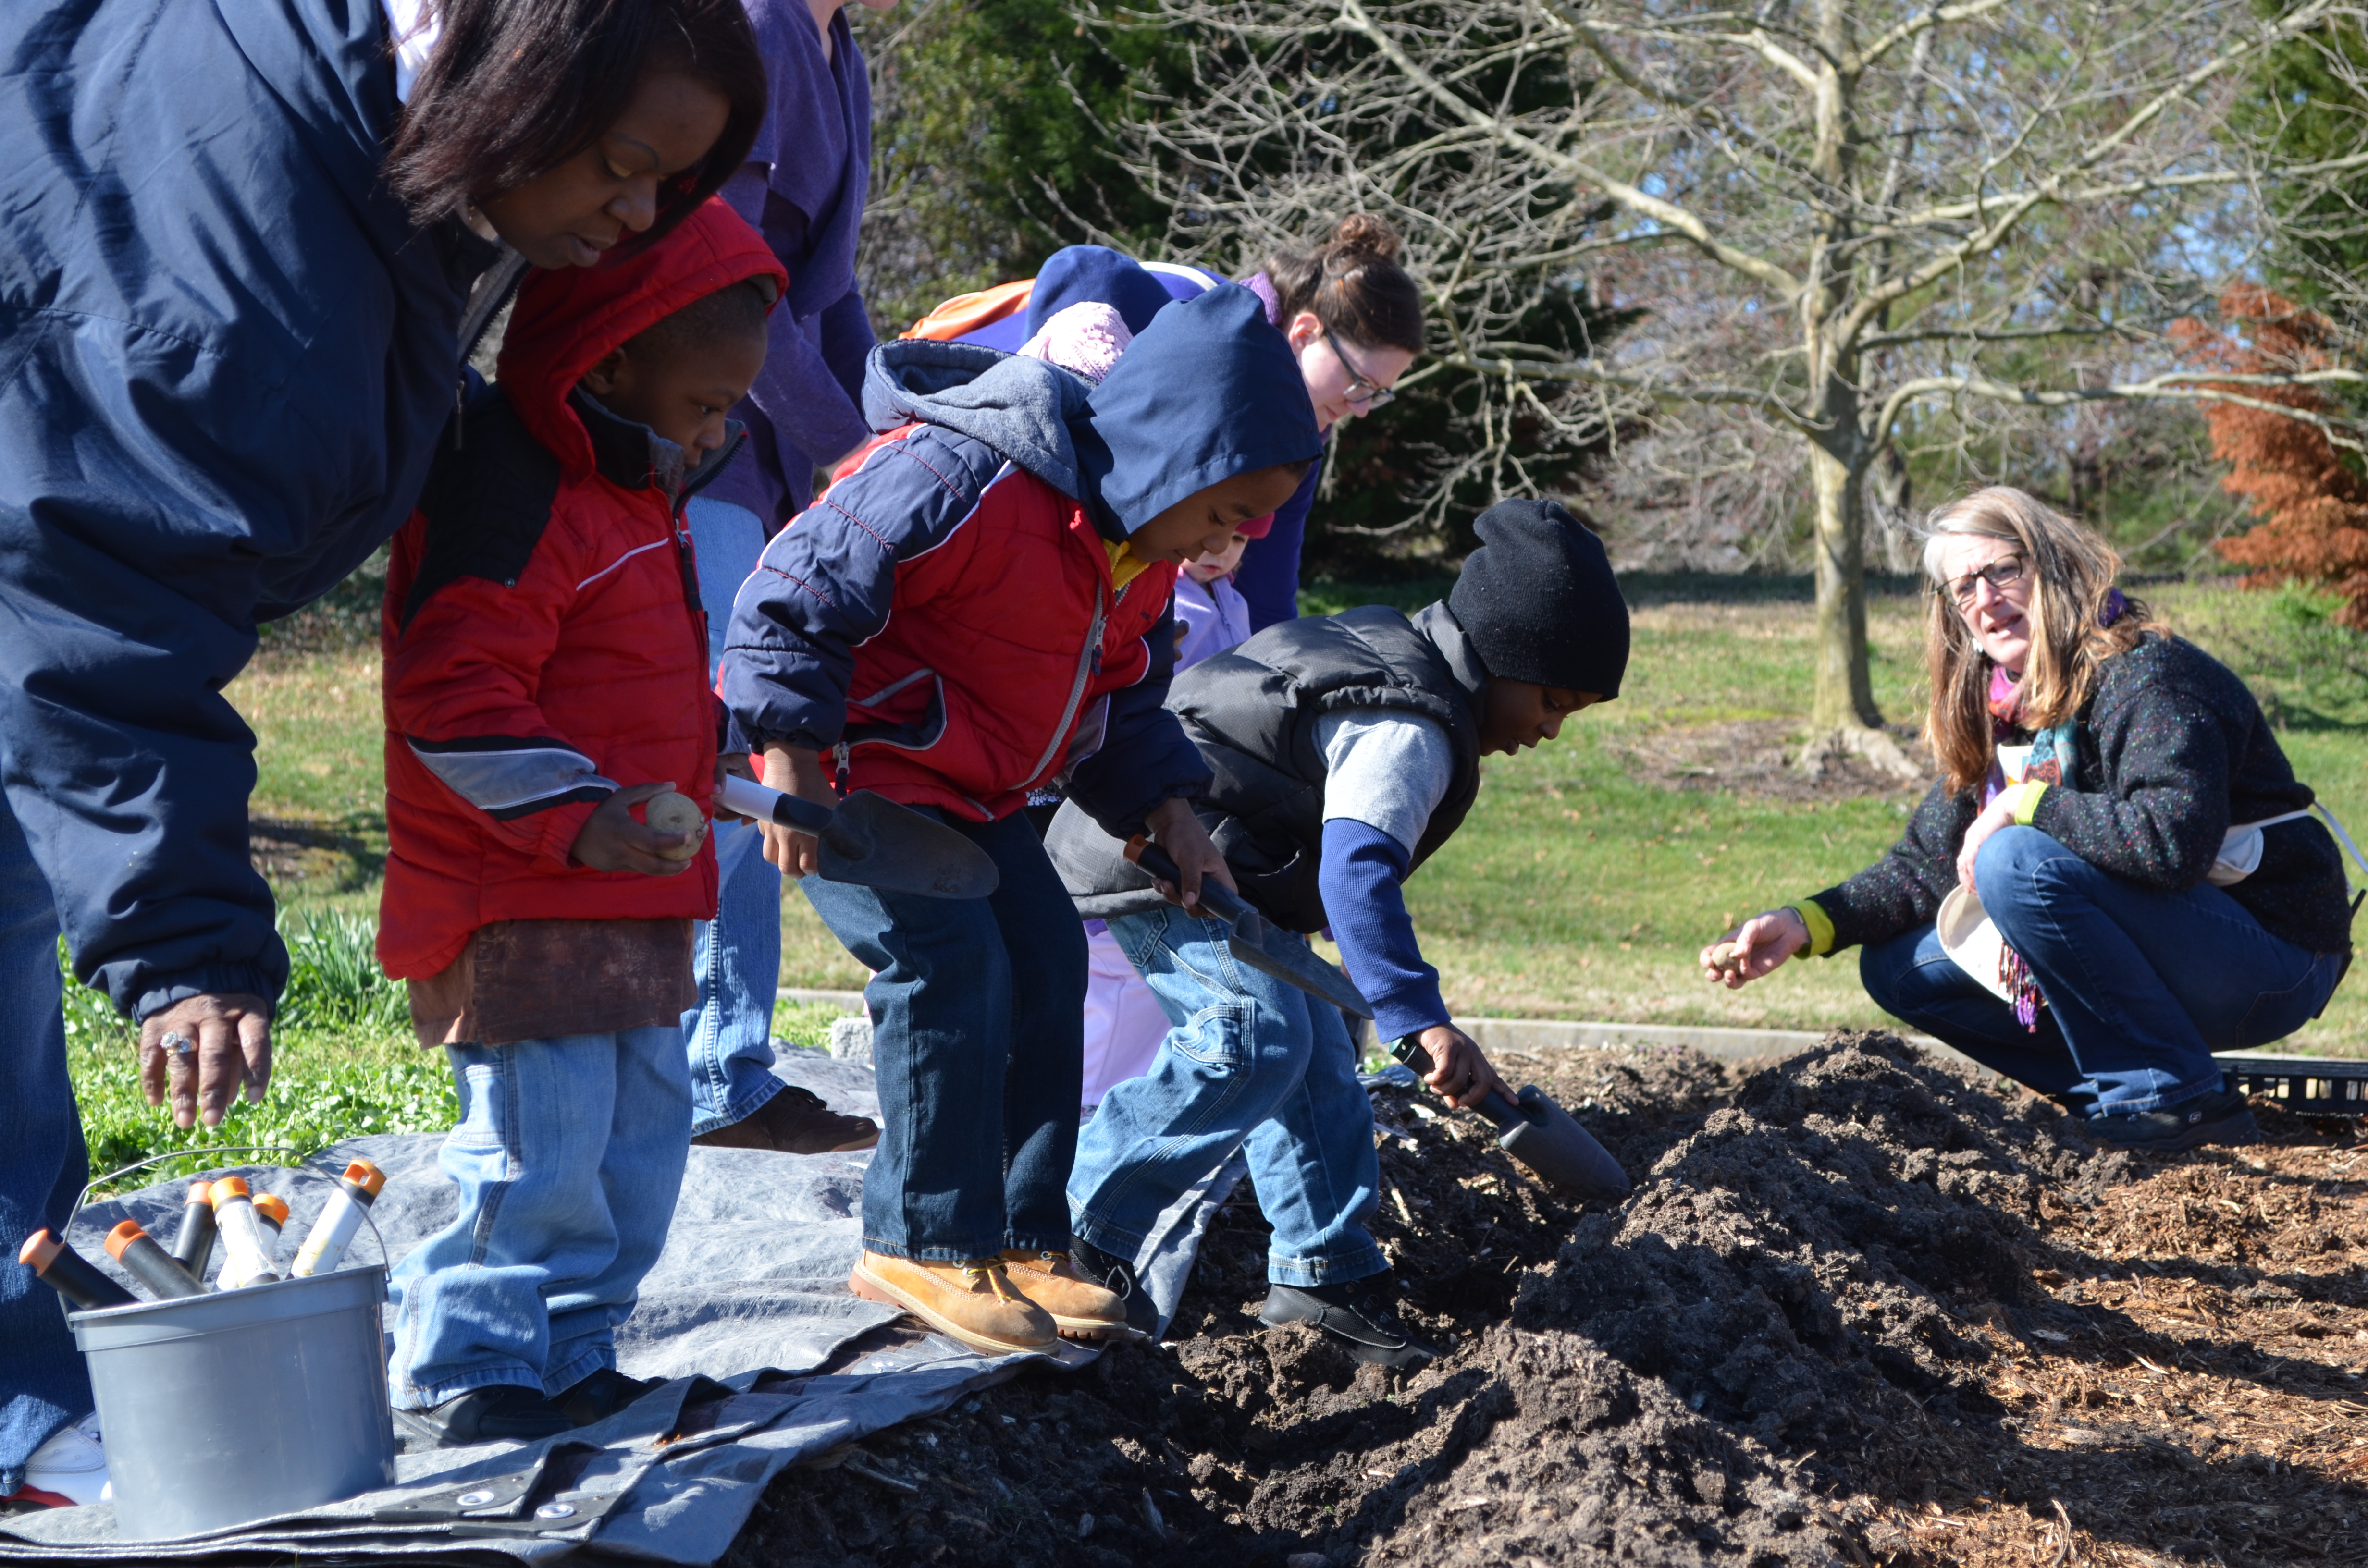 Children Plant Potatoes & Peas to Celebrate the First Day of Spring ...